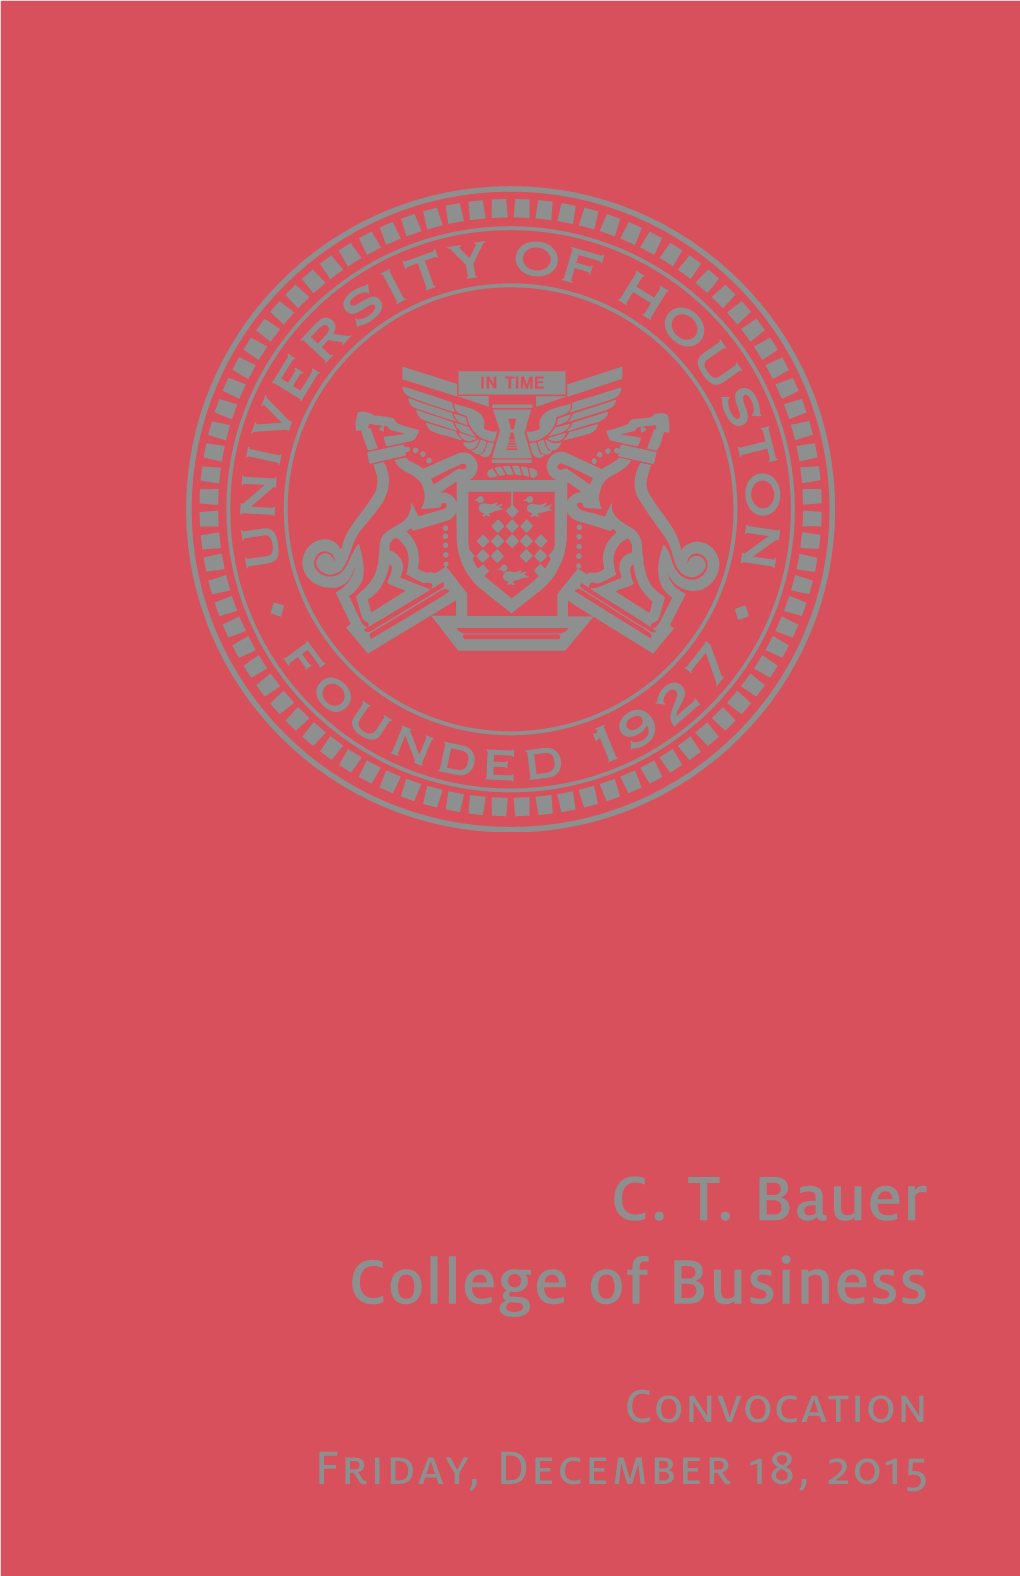 C. T. Bauer College of Business